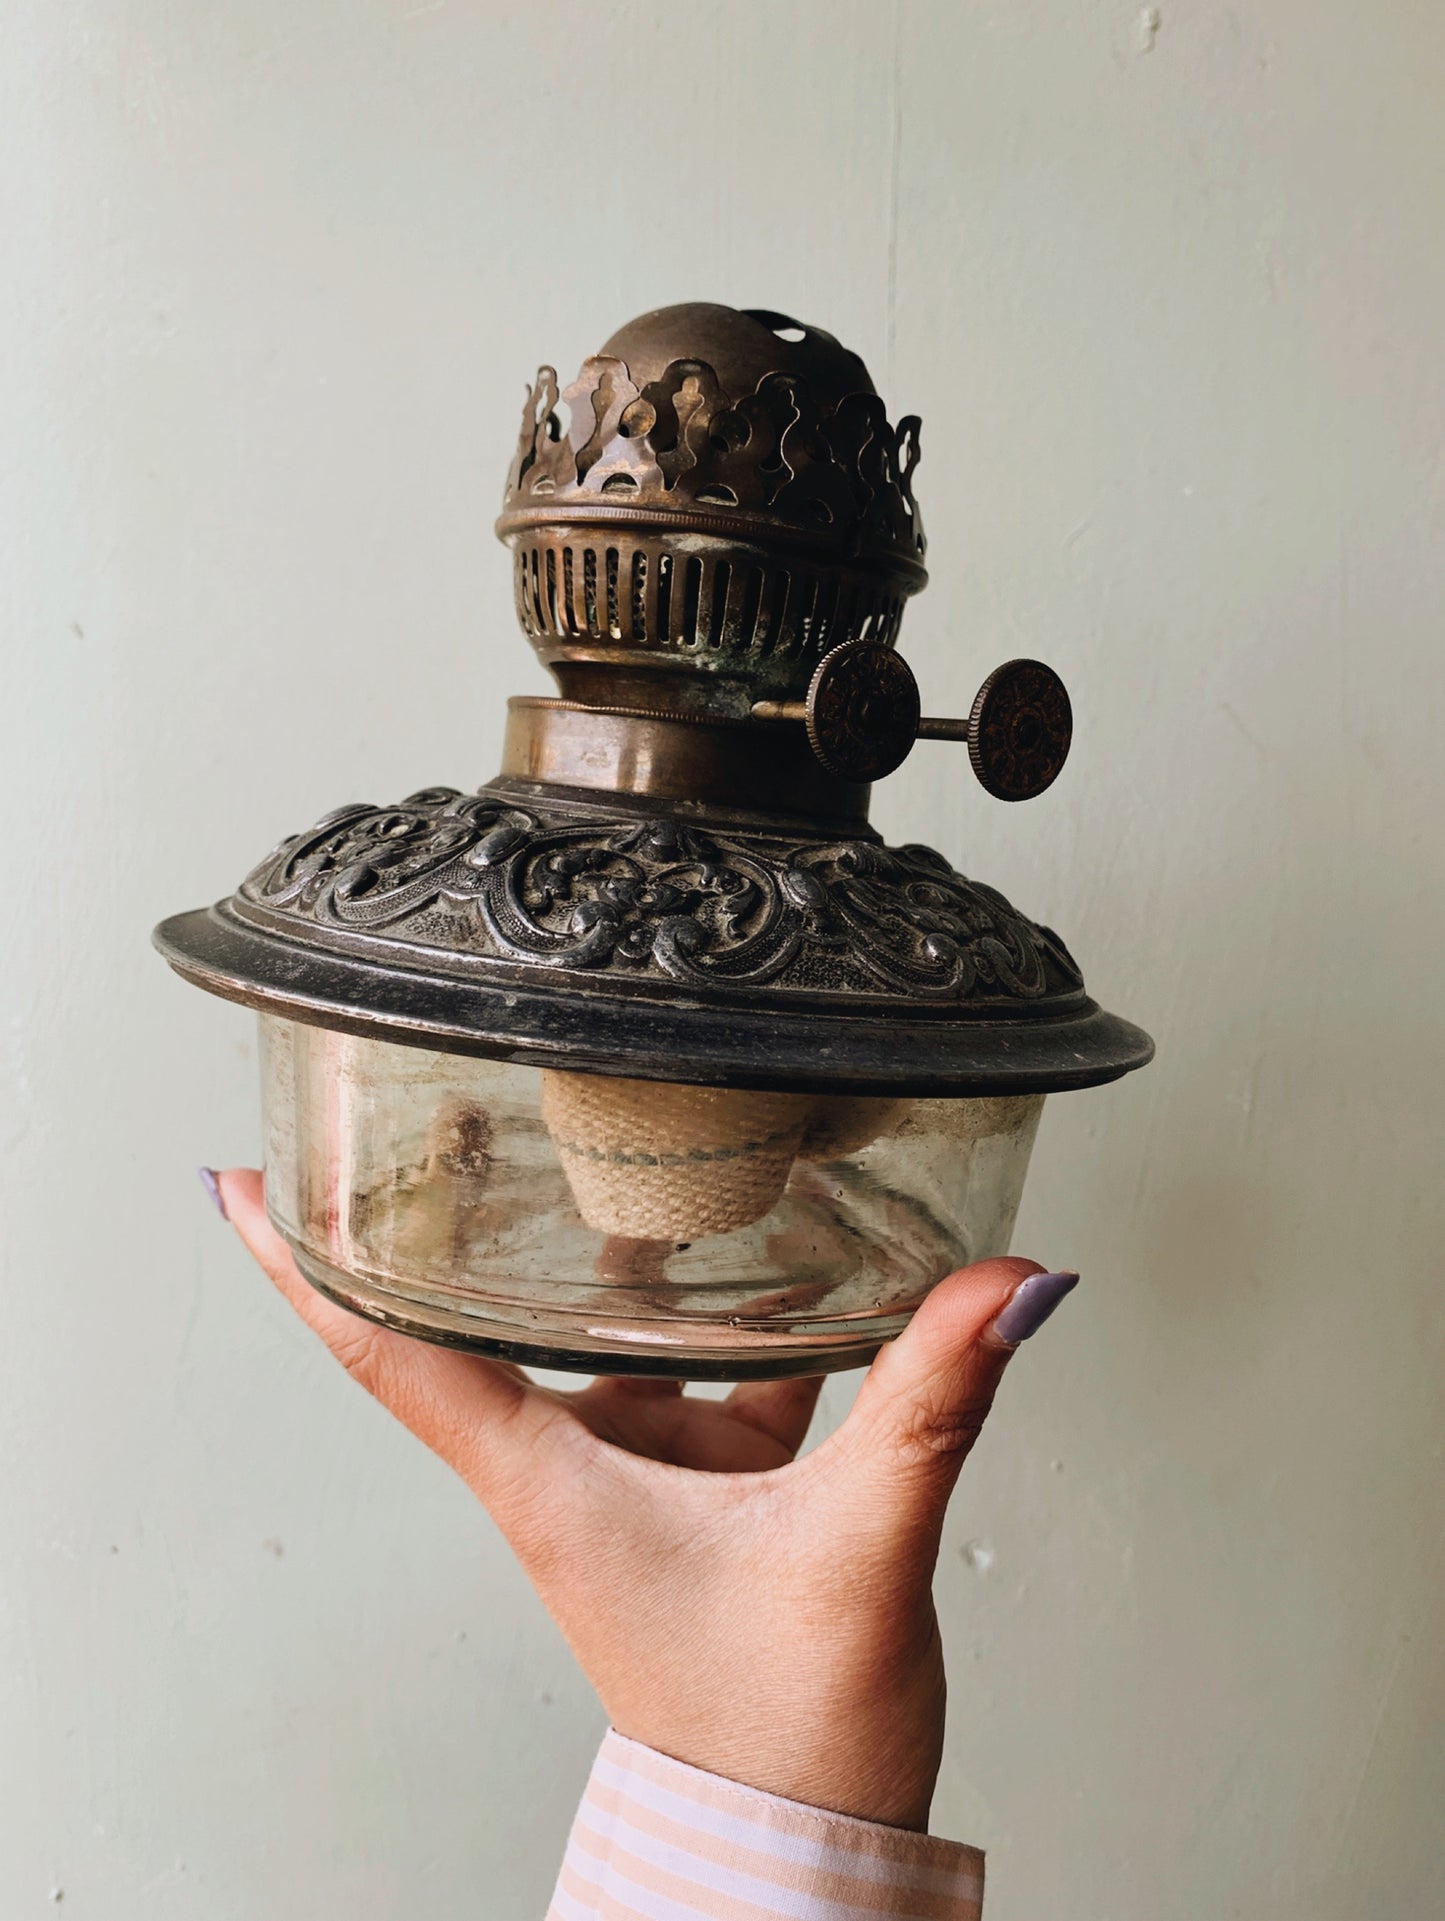 Antique Oil Burner with Decorative Relief (UK shipping only)